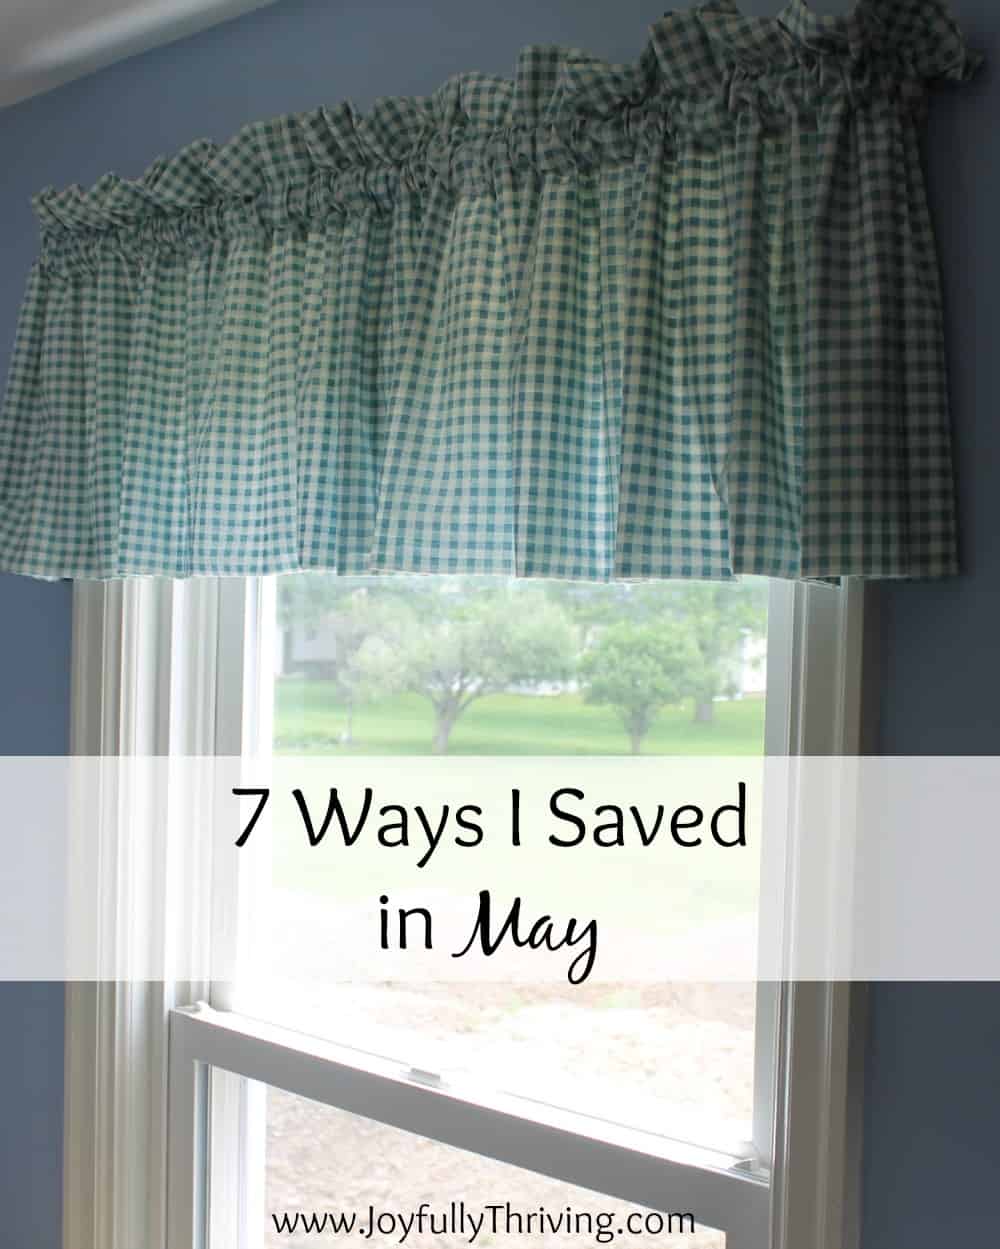 7 Ways I Saved in May - Here's a list of different ways I saved this month. It's amazing how the little things add up each month!